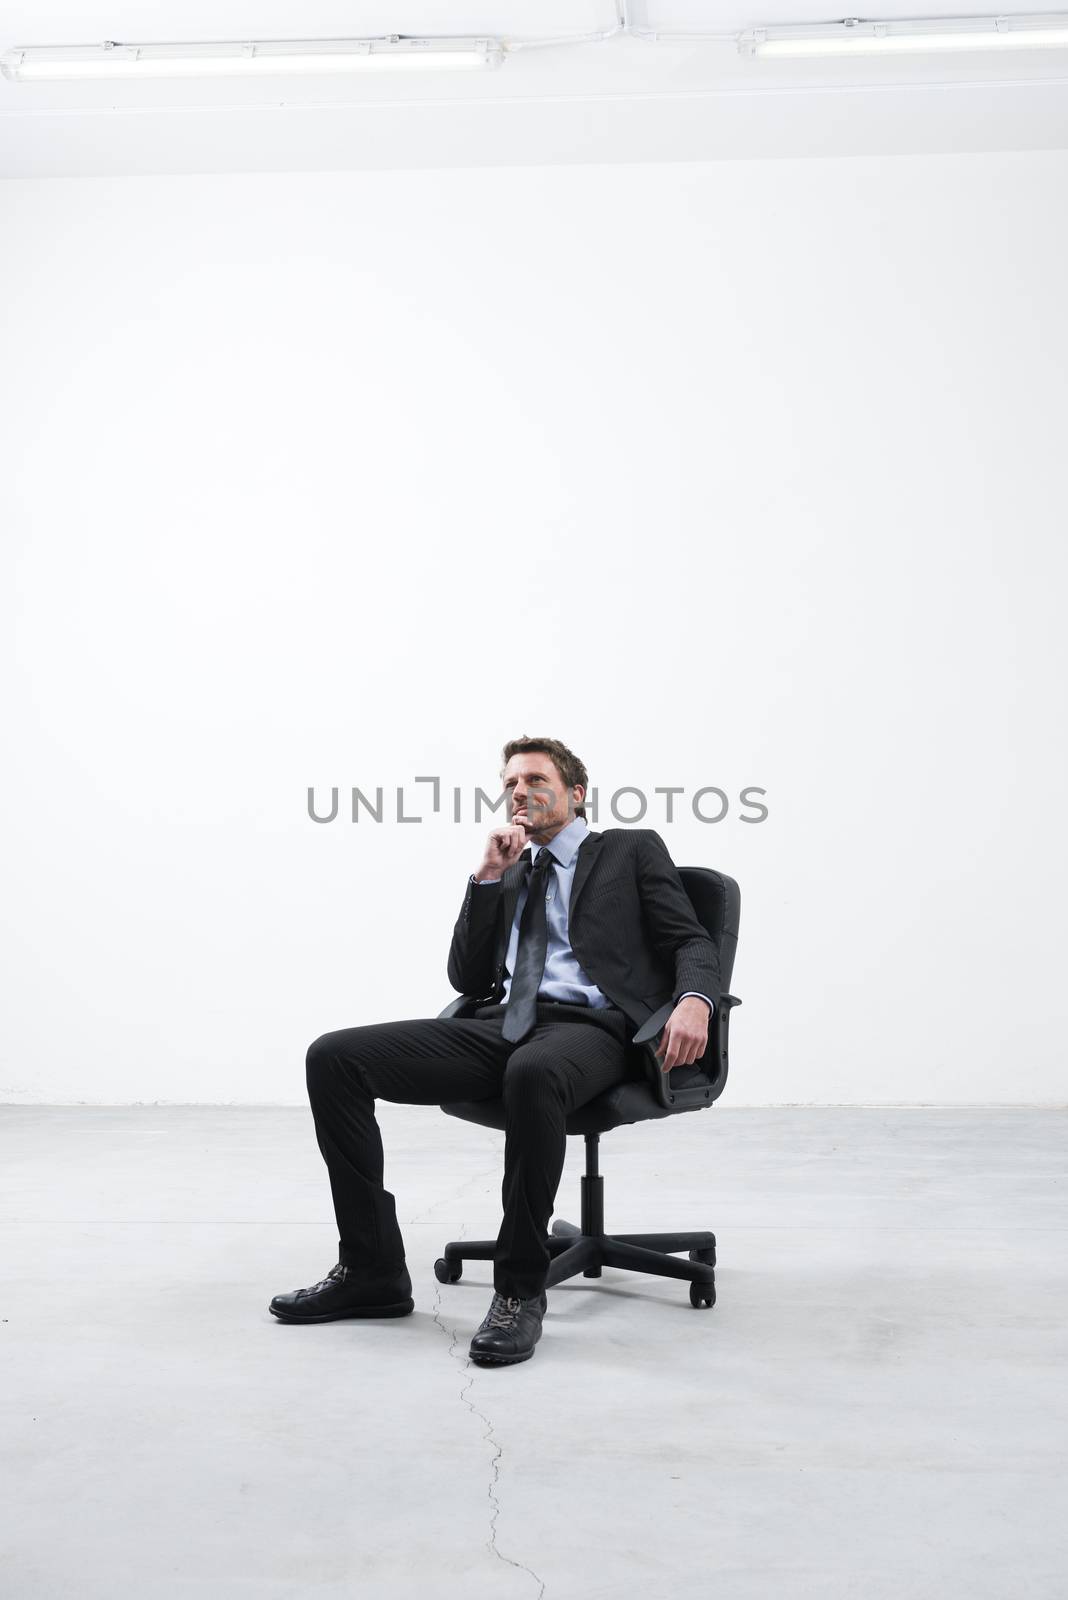 Businessman sitting in his new empty office looking around with hand on chin.